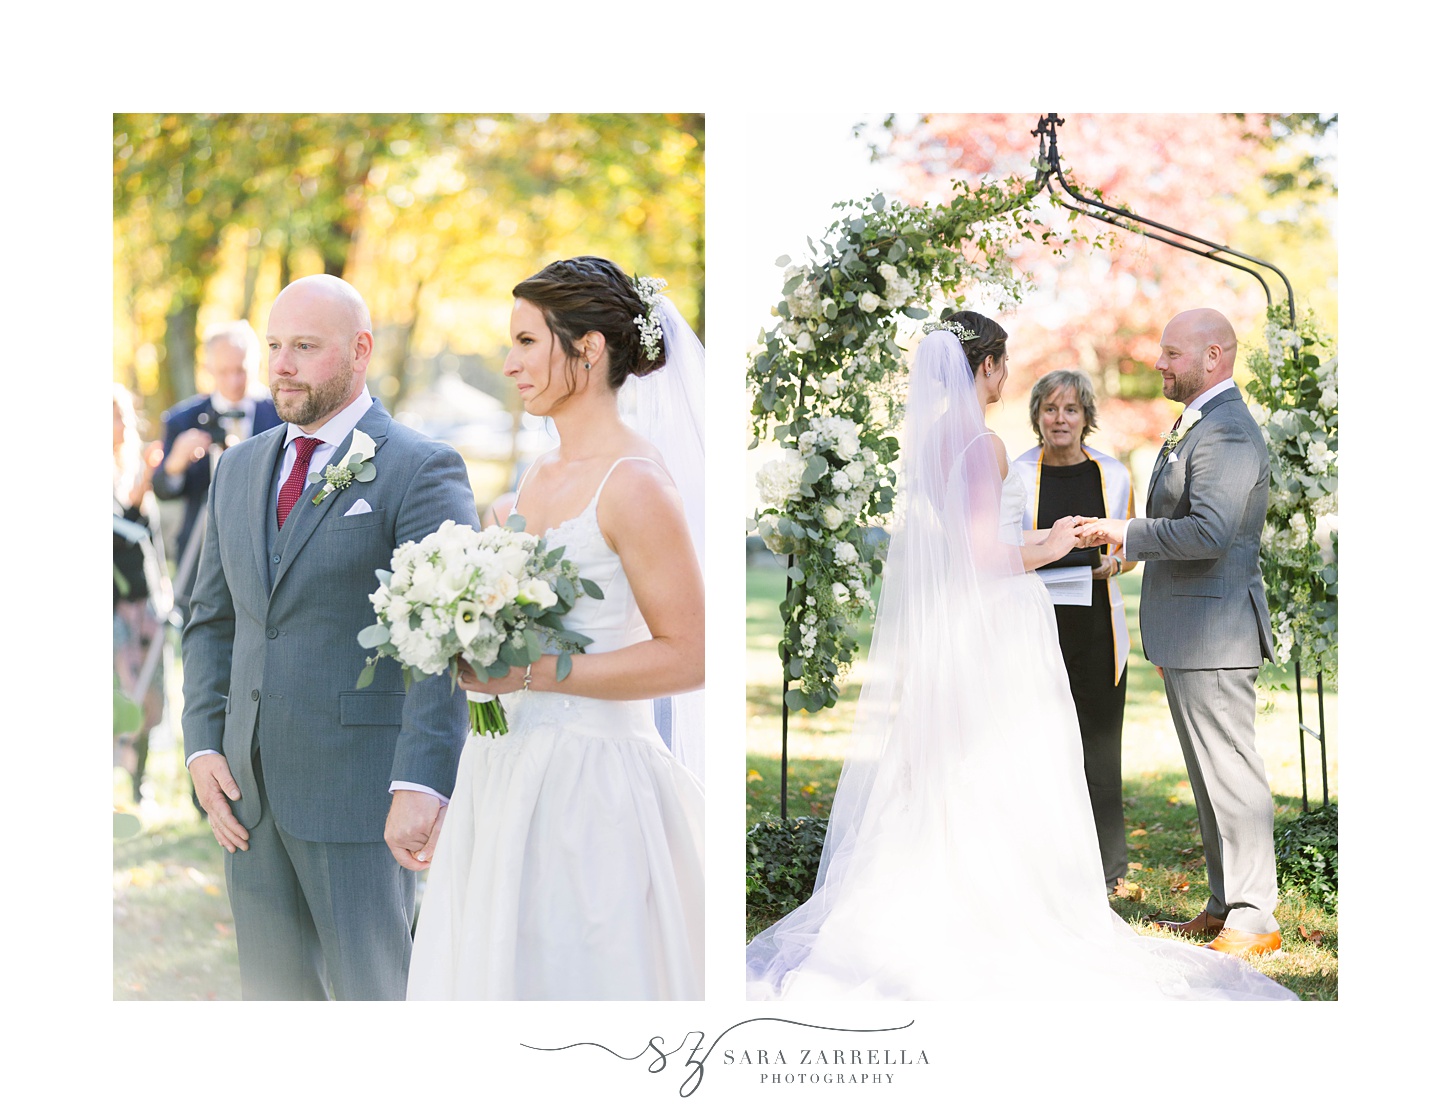 romantic and intimate wedding ceremony at Gerald's Farm in Rhode Island